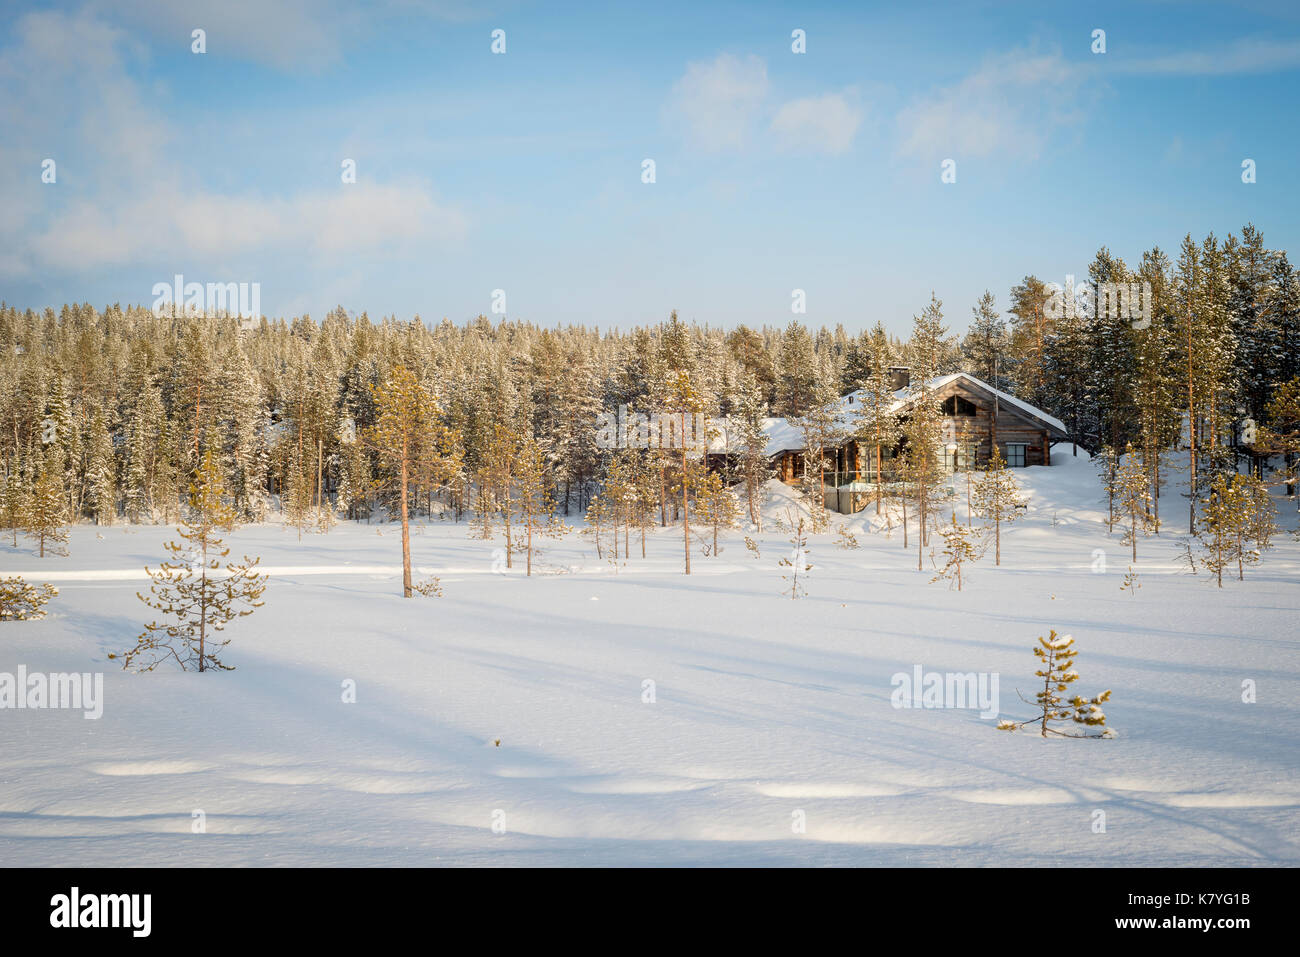 Wood cabin at edge of winter forest, Finland. Stock Photo